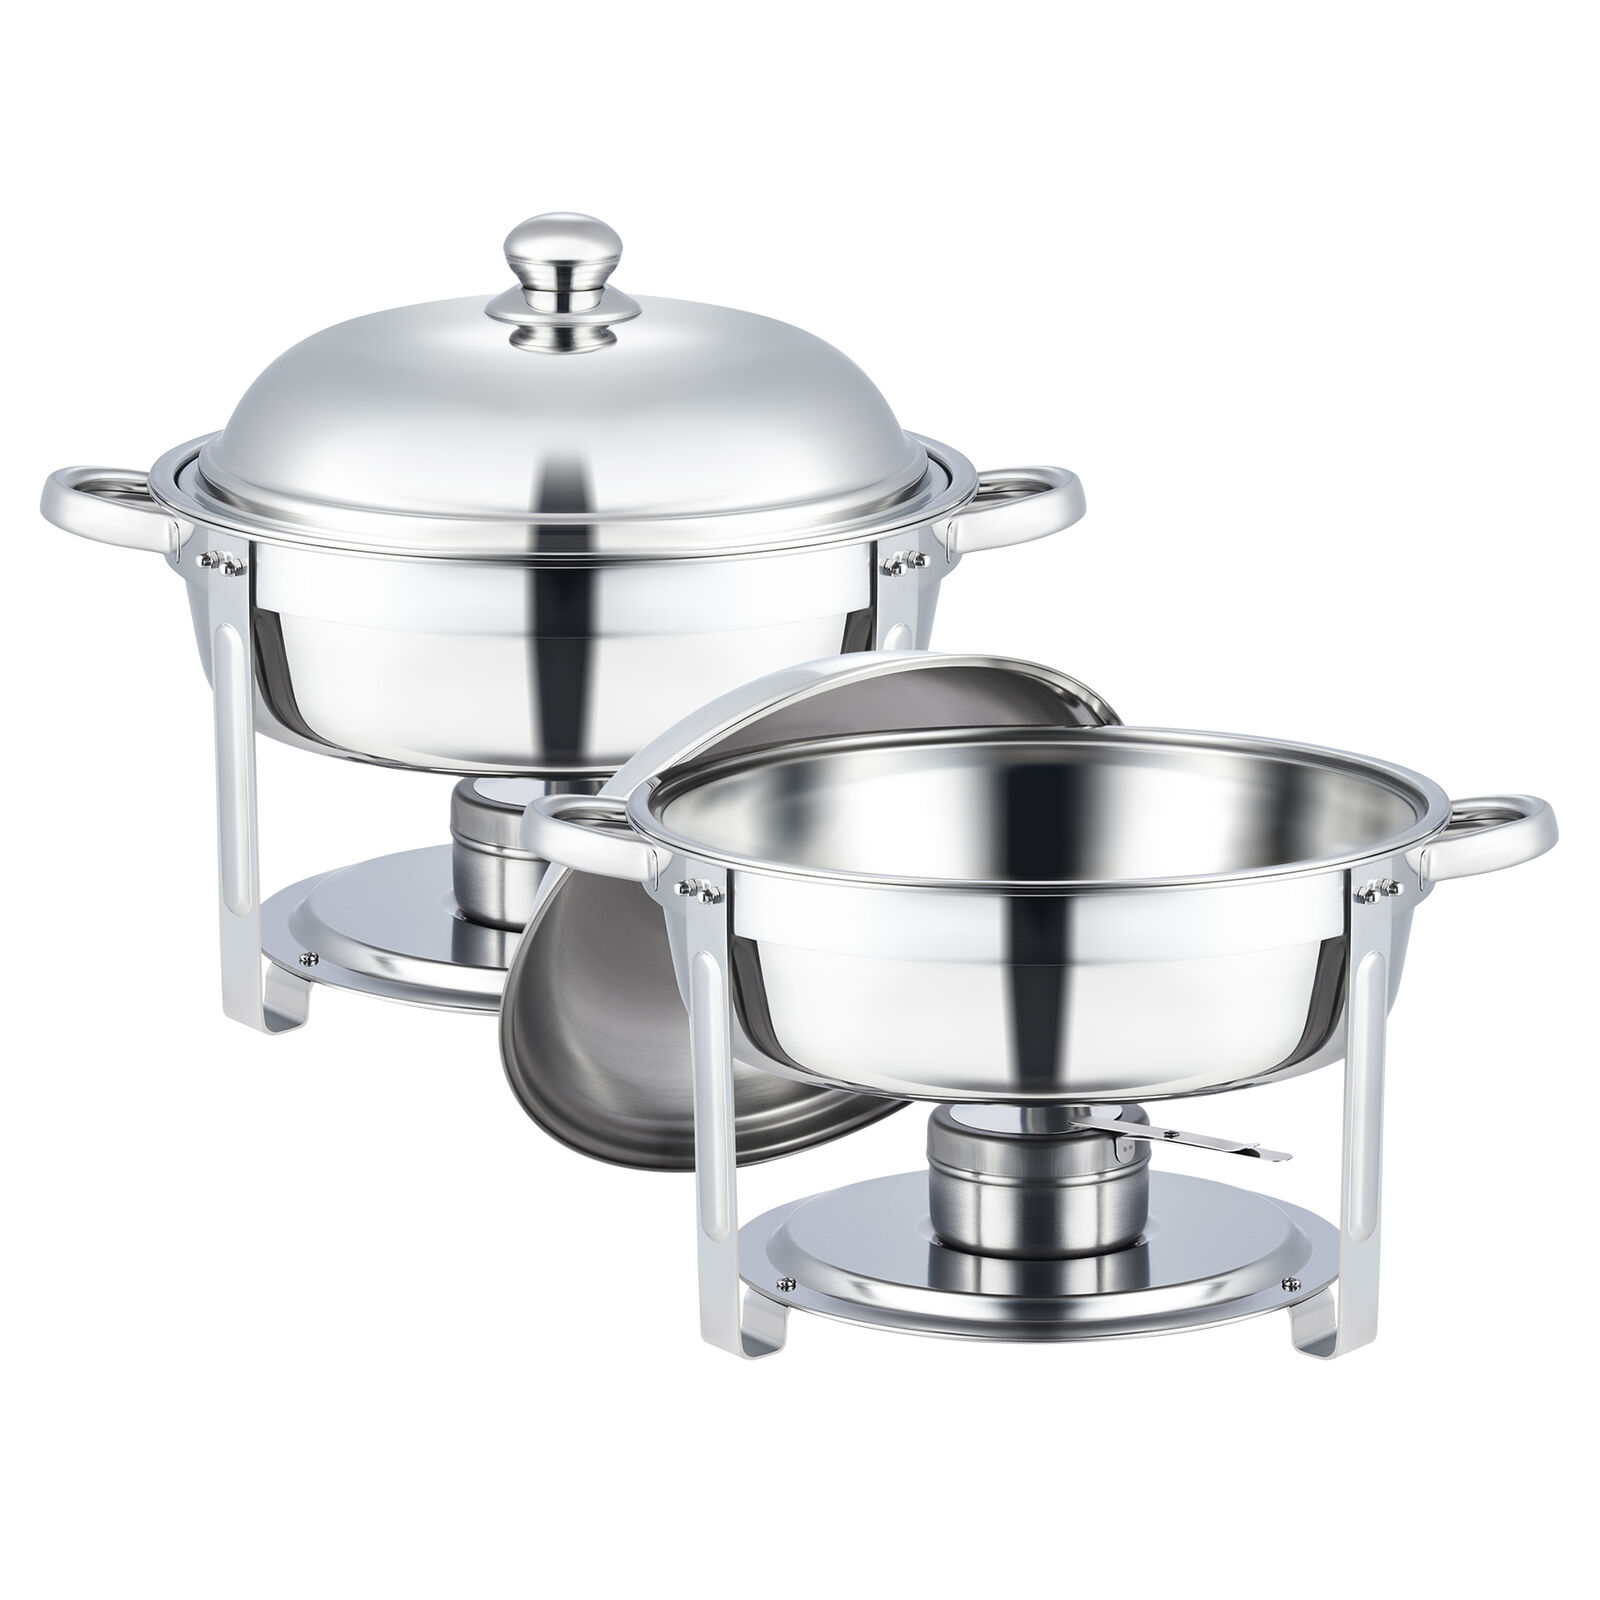 2 Pack Stainless Steel Chafer 5.3Qt Chafing Dish Sets Bain Marie Food Warmer